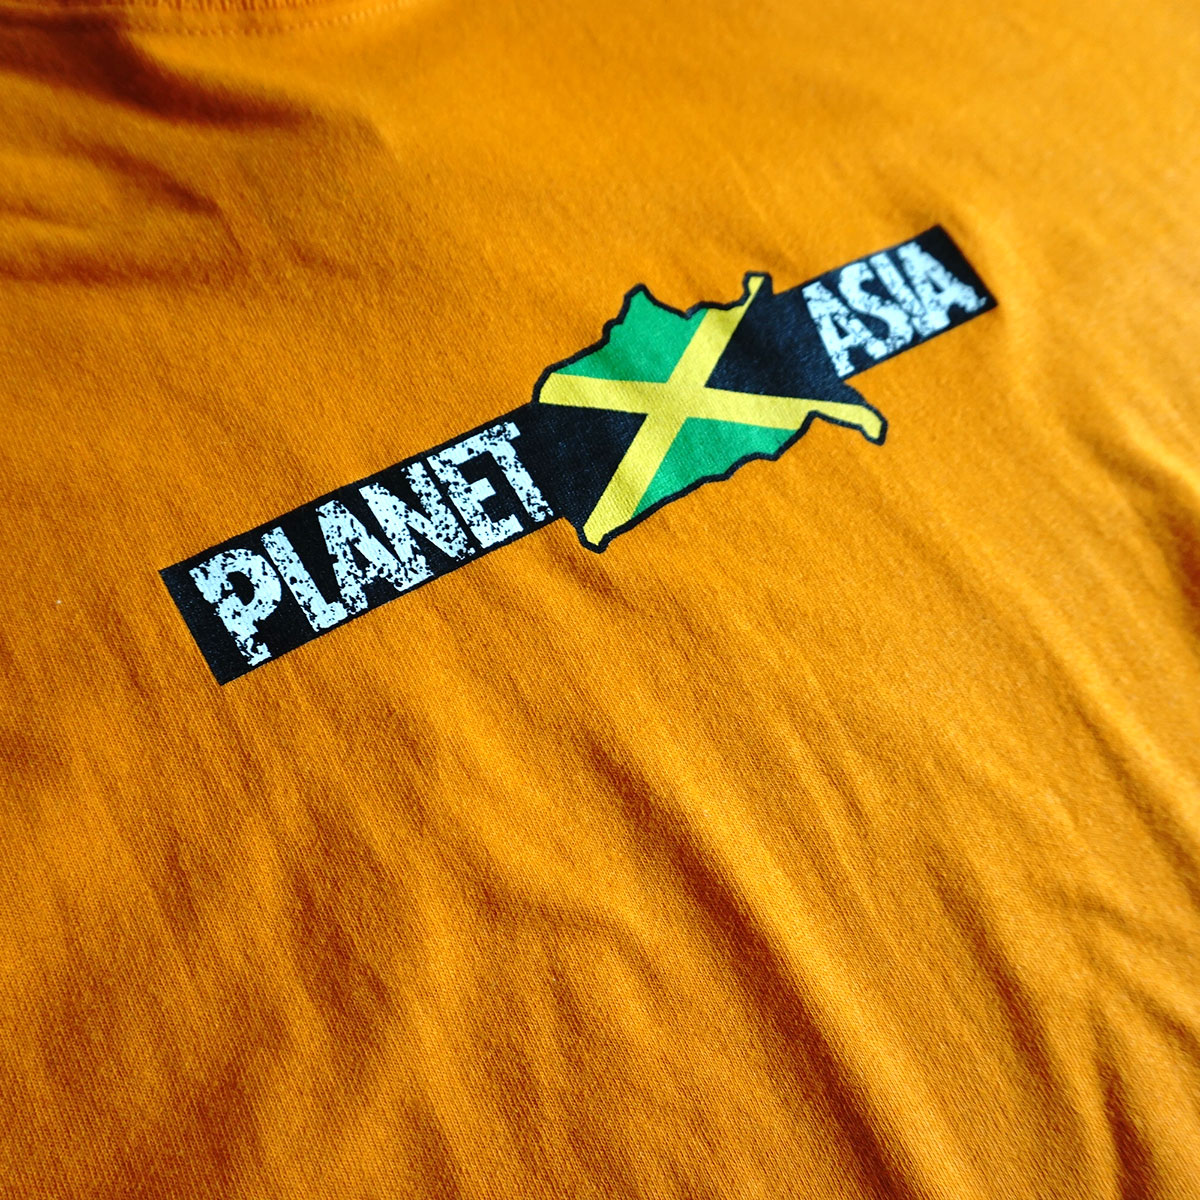 Used to Love - Planet Asia Vintage Tee